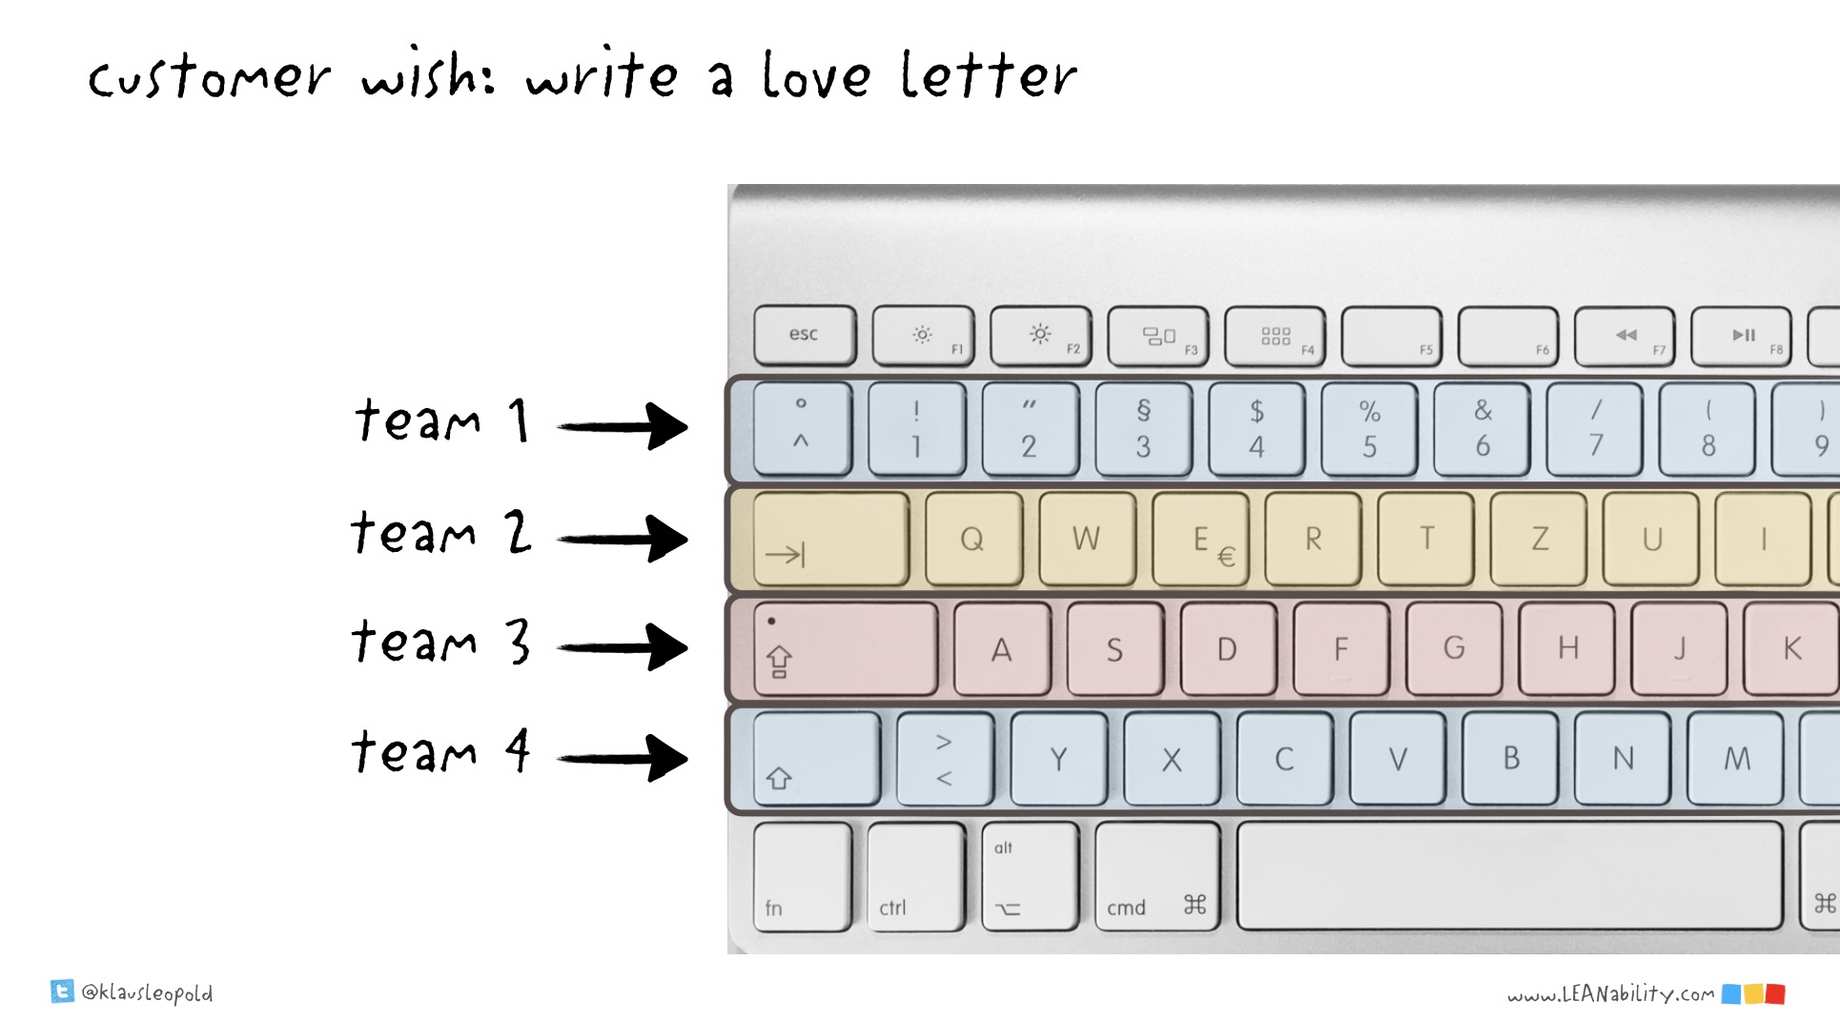 Sketch of a keyboard. Each line of letters represents the tasks of a team and has its own color. The task is to write a love letter. The sketch is by Klaus Leopold.